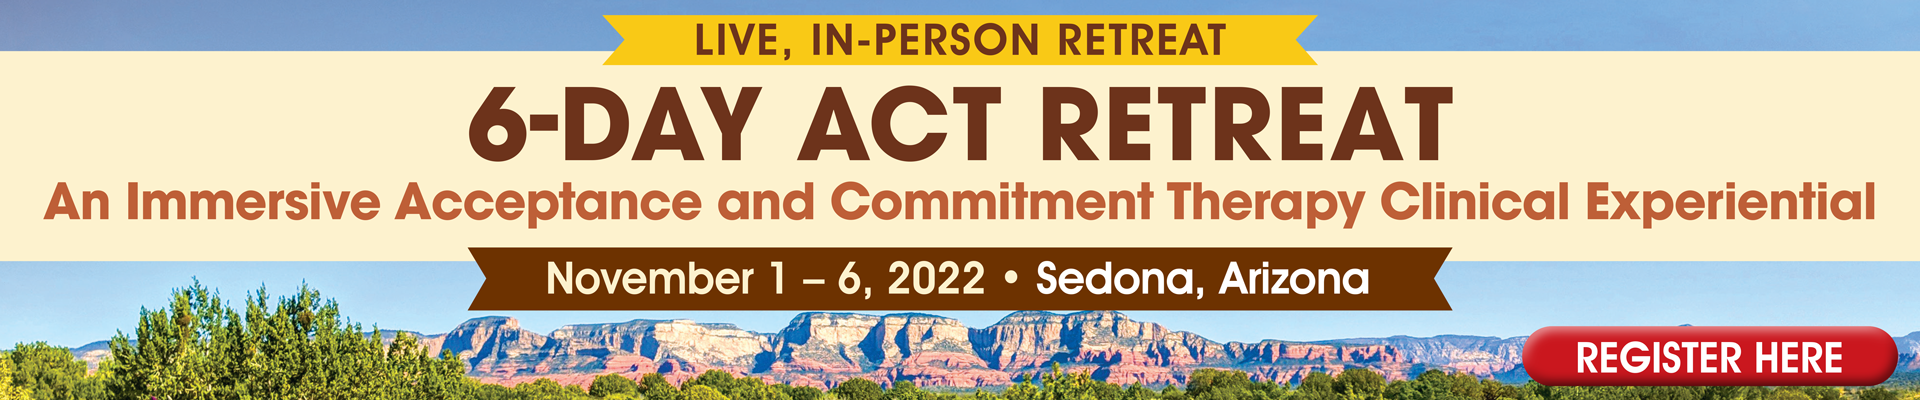 6-Day ACT Retreat: An Immersive Acceptance and Commitment Therapy Clinical Experiential